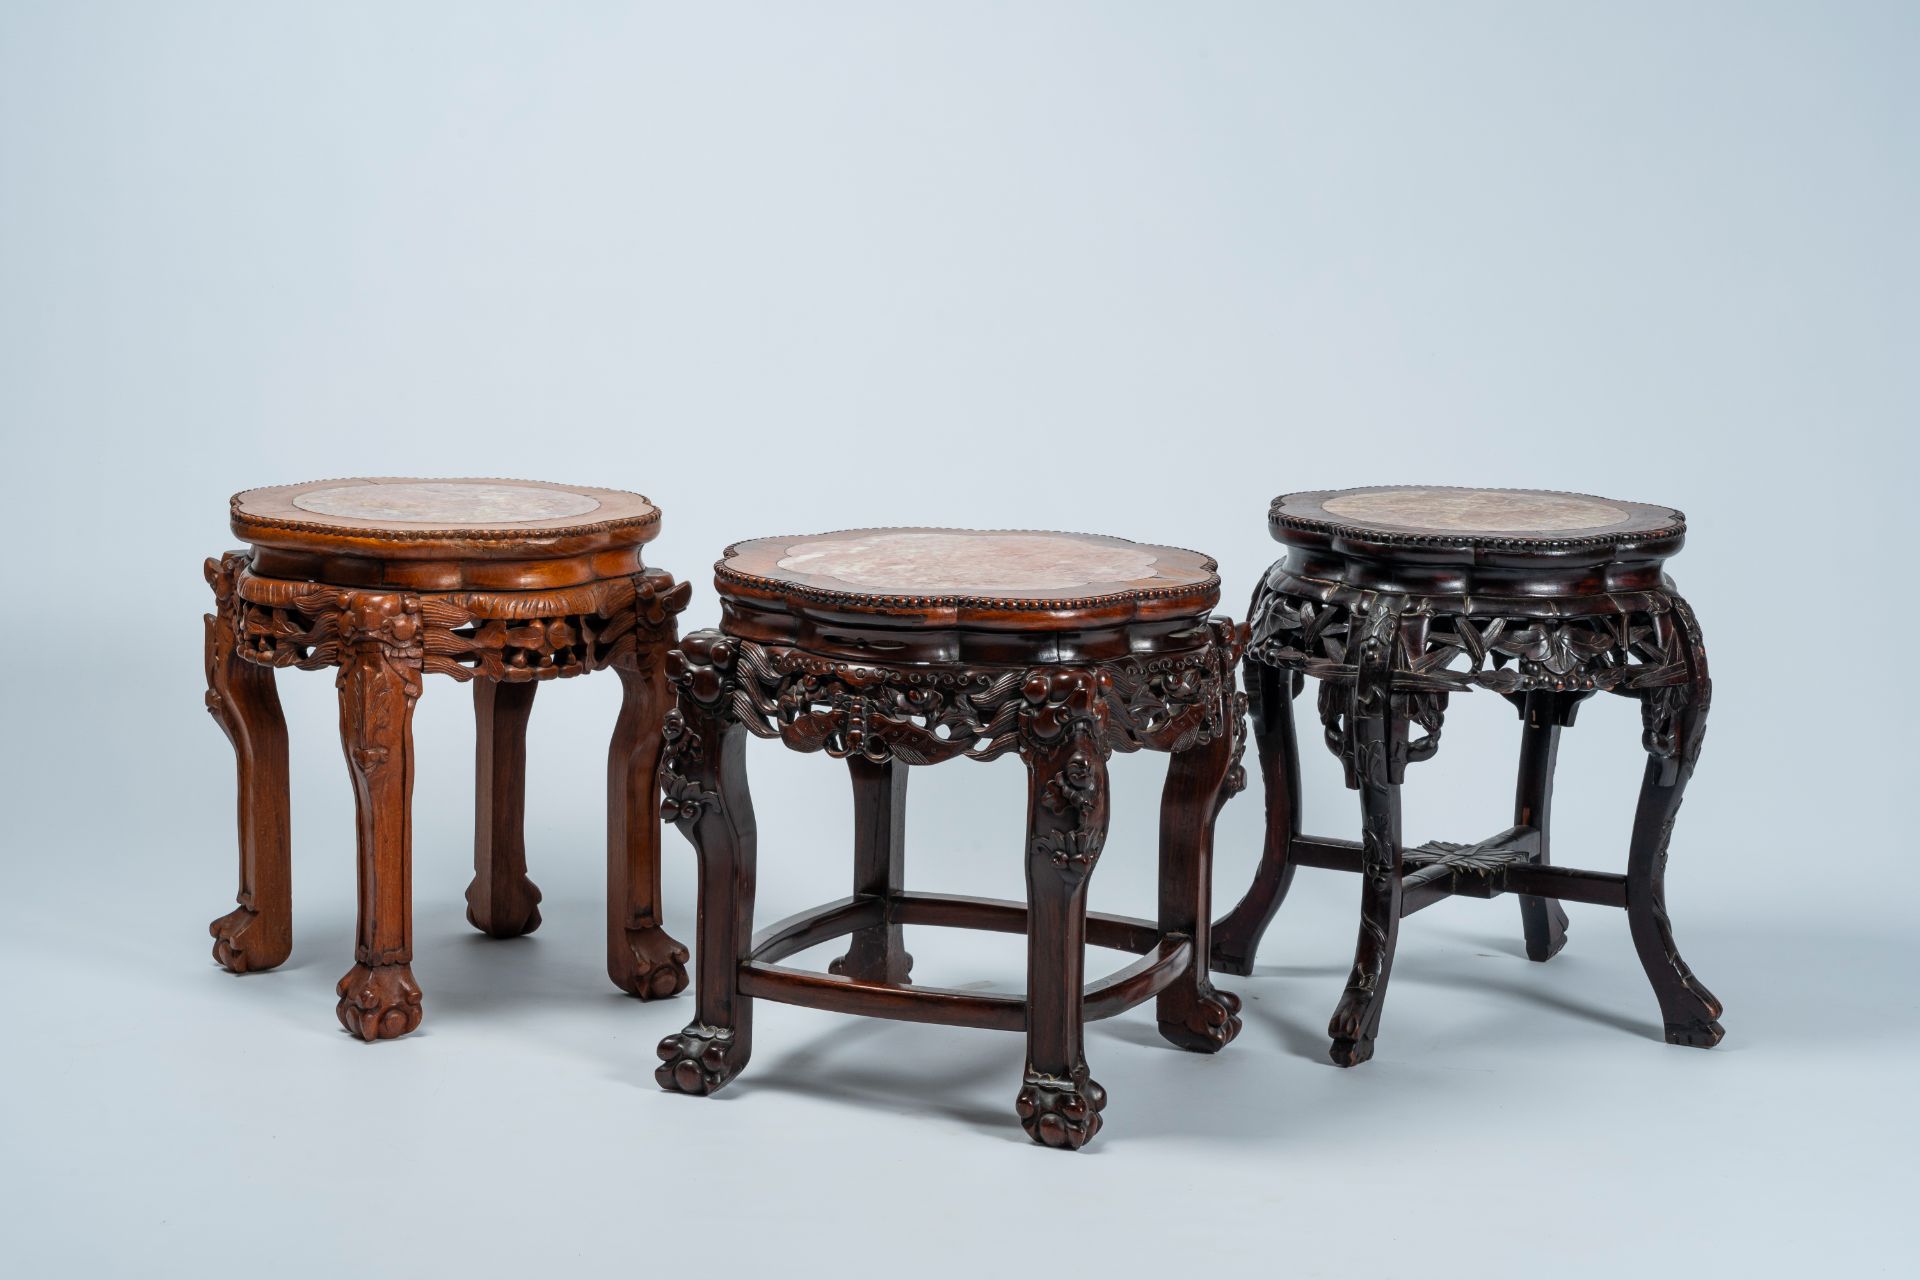 Three Chinese open worked lobed carved wood stands with marble top, 19th/20th C. - Image 2 of 8